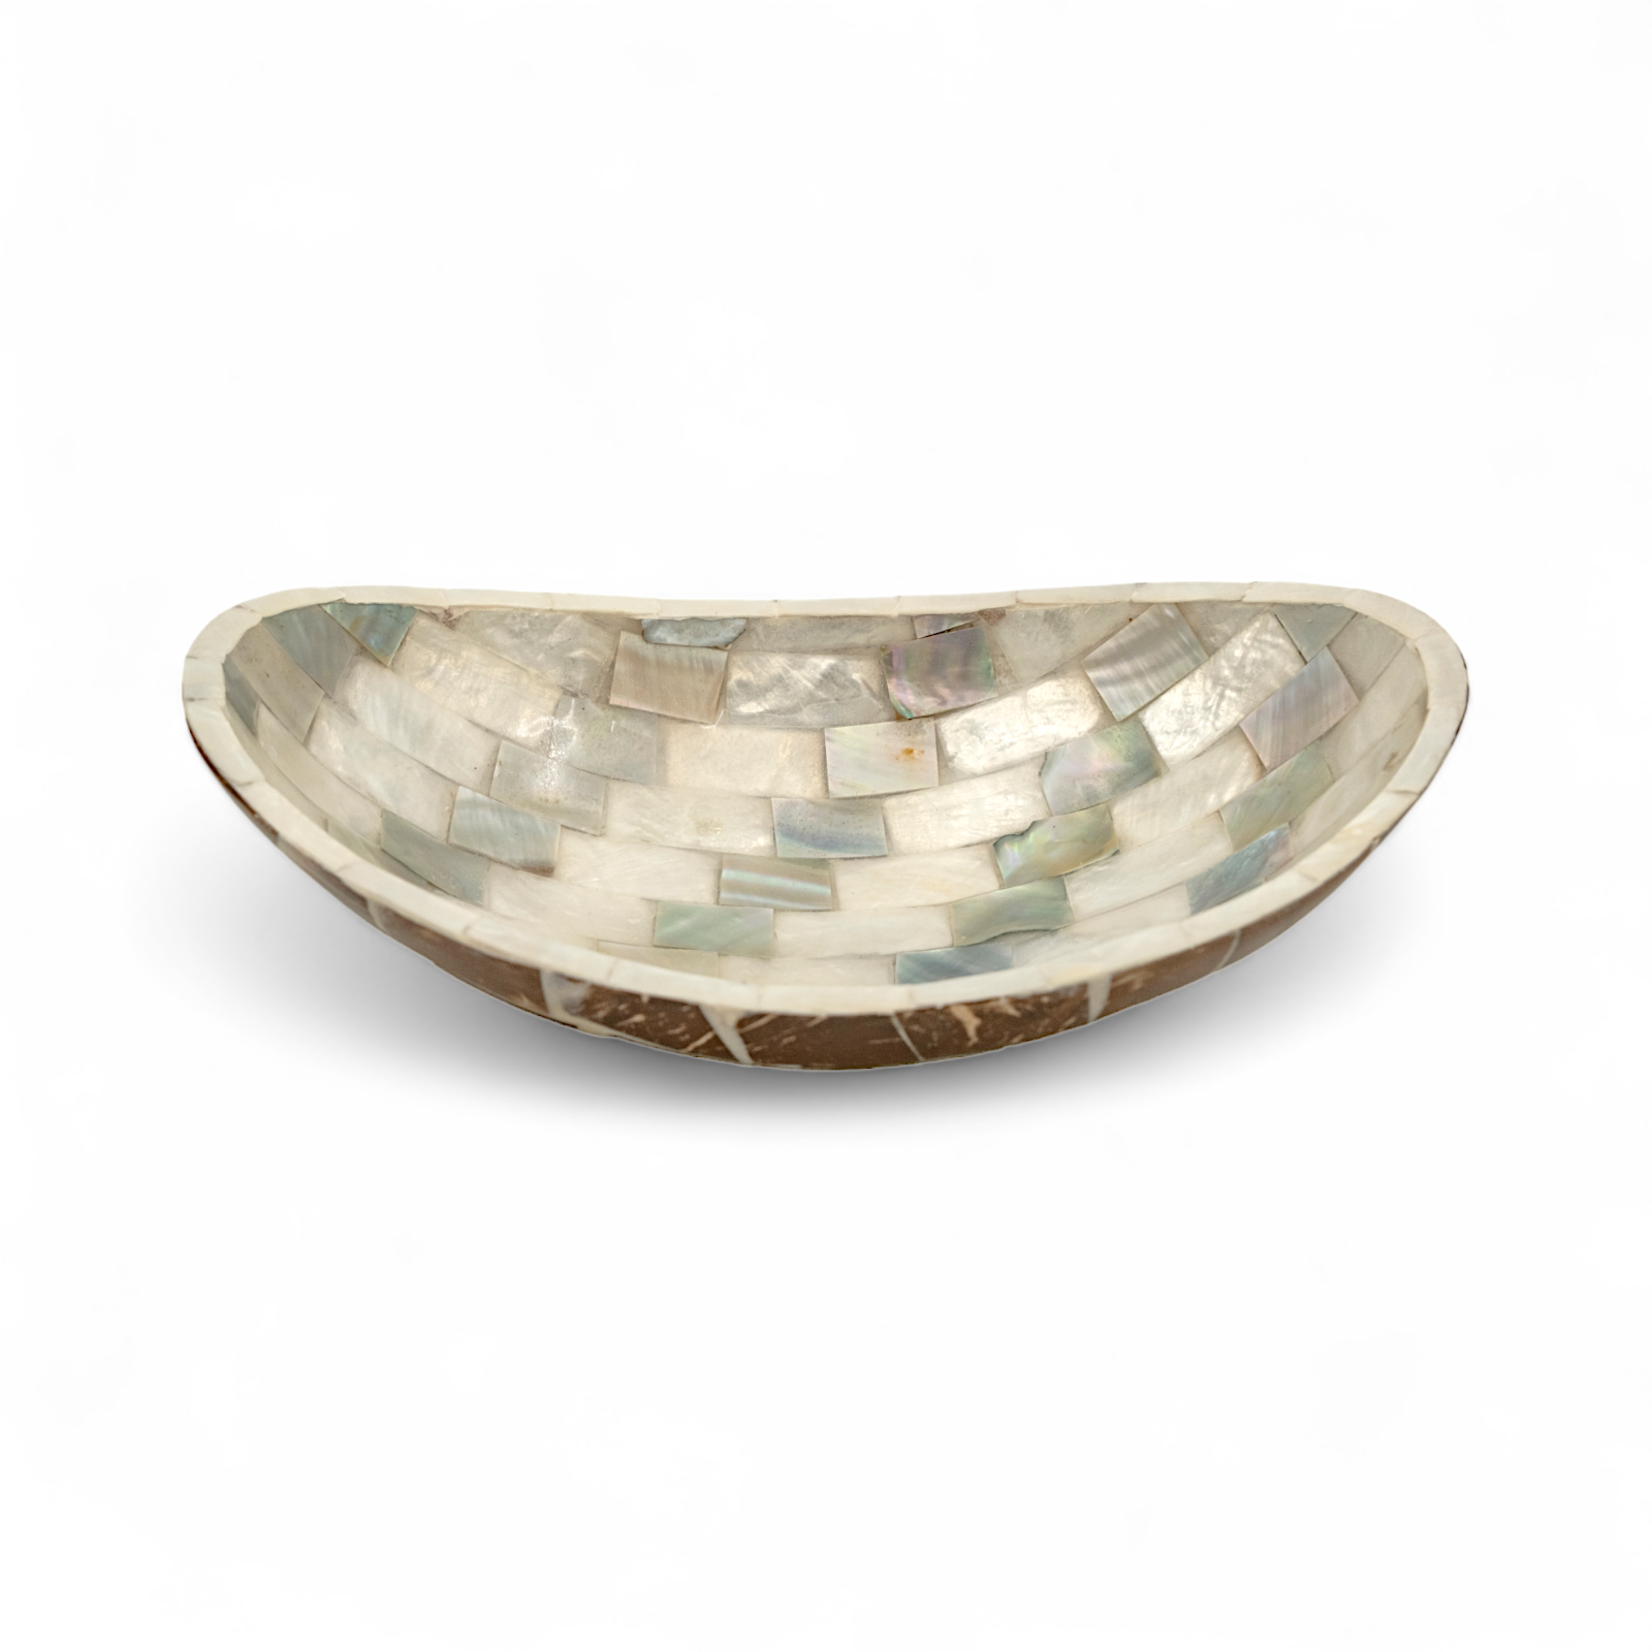 Hand Made Mother of Pearl Paua Shell Mosaic Oval Bowl  Coconut Shell Resin Back